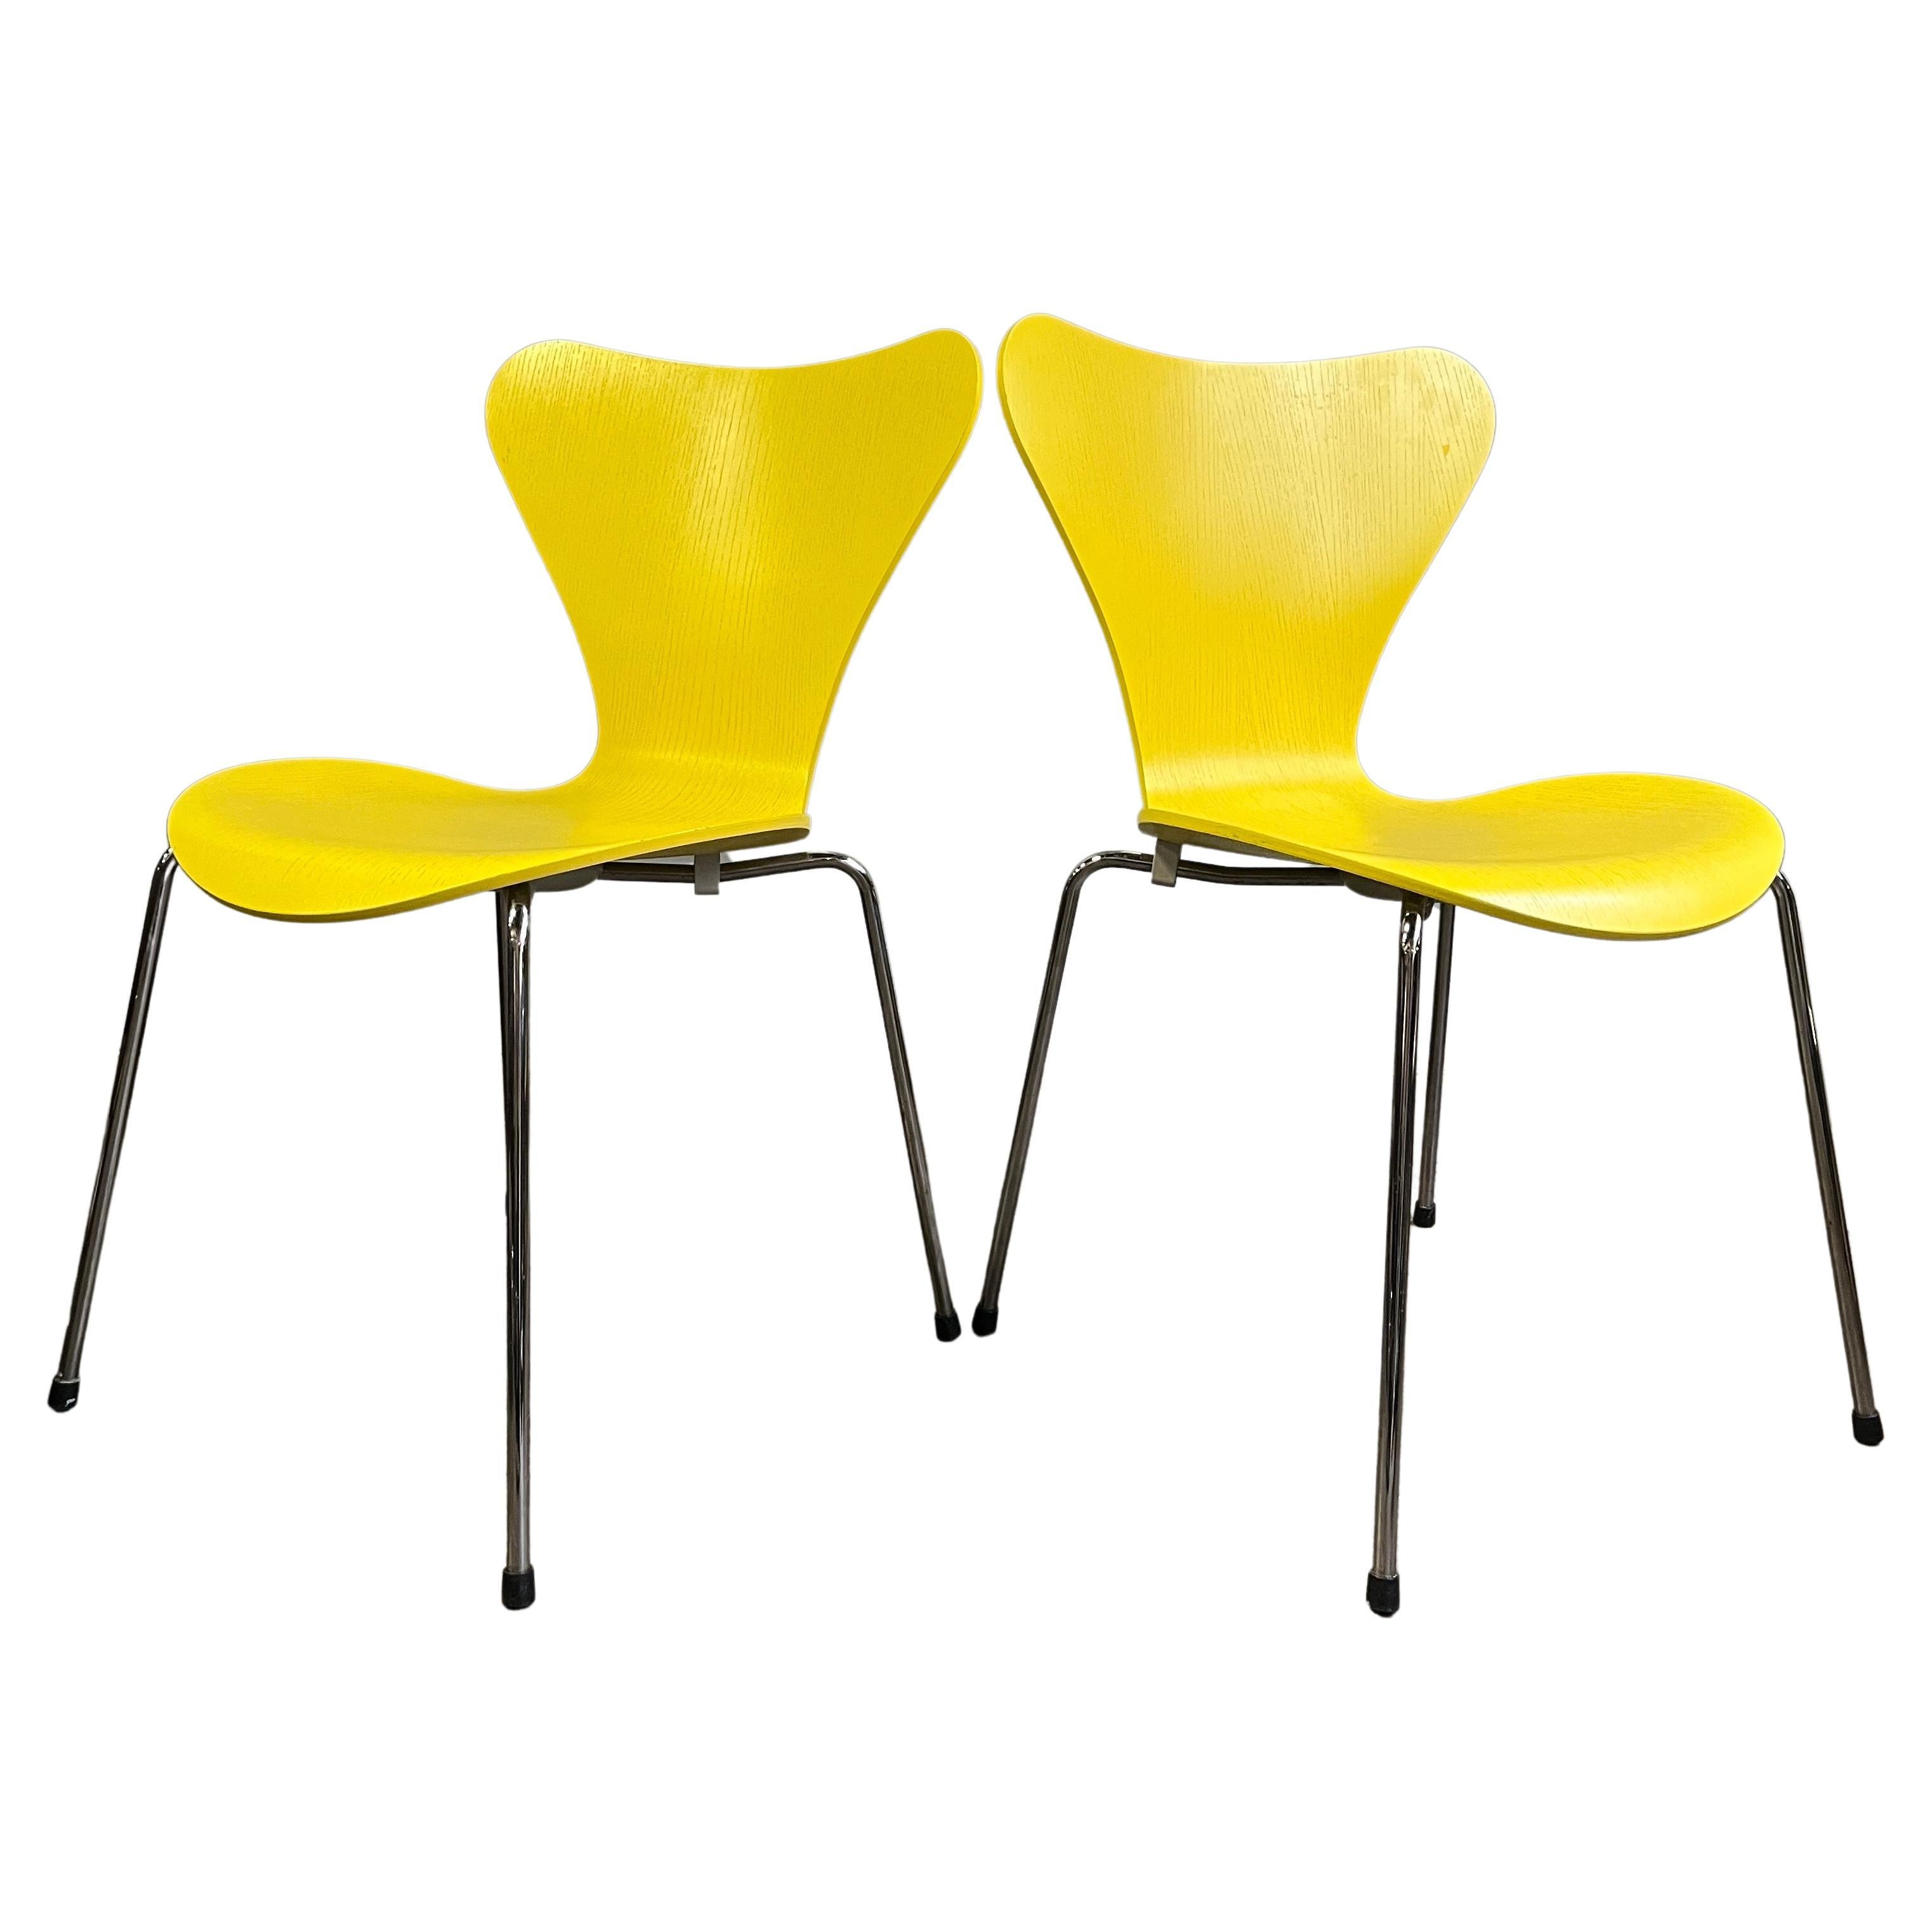 Steel Midcentury Arne Jacobsen Series 7 Chairs Sunny Yellow For Sale